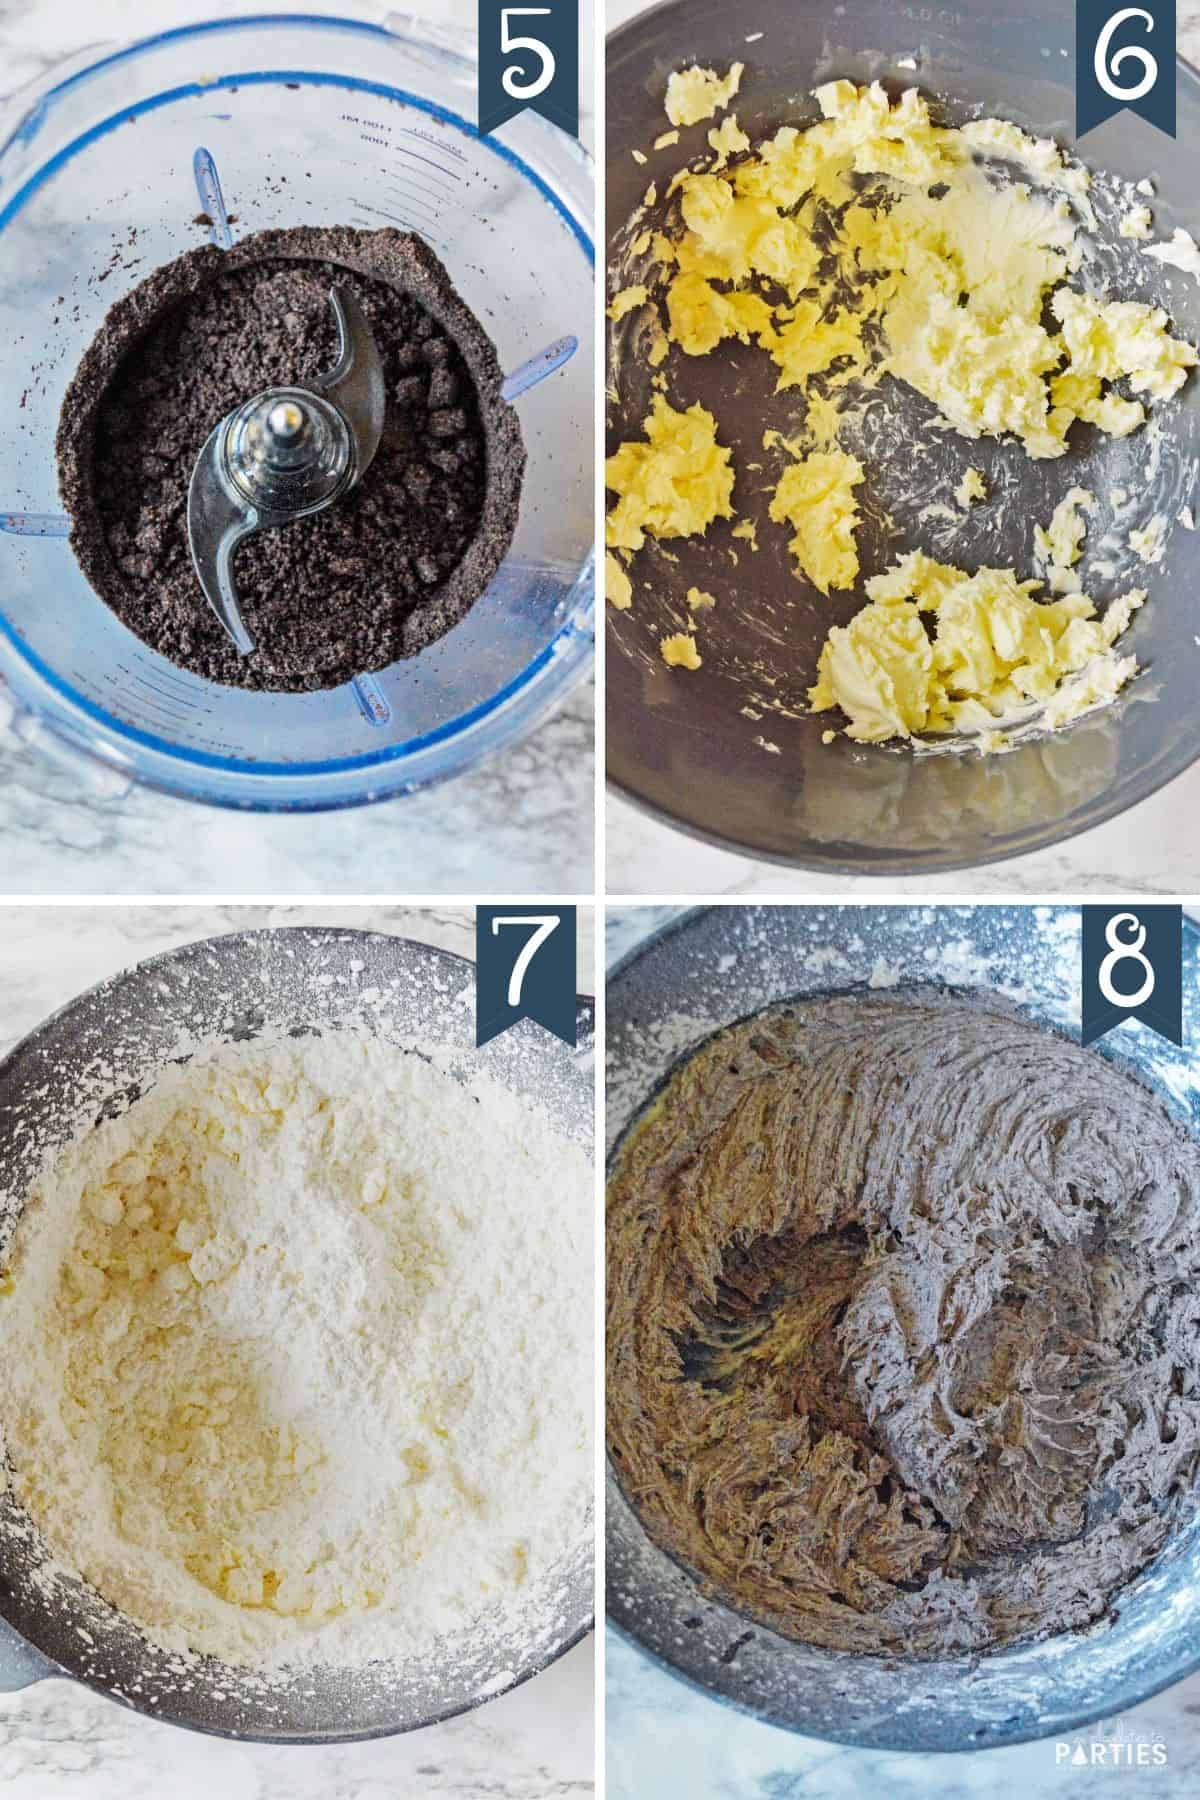 How to Make Oreo Cupcakes with Cookies and Cream Frosting Steps 5-8.